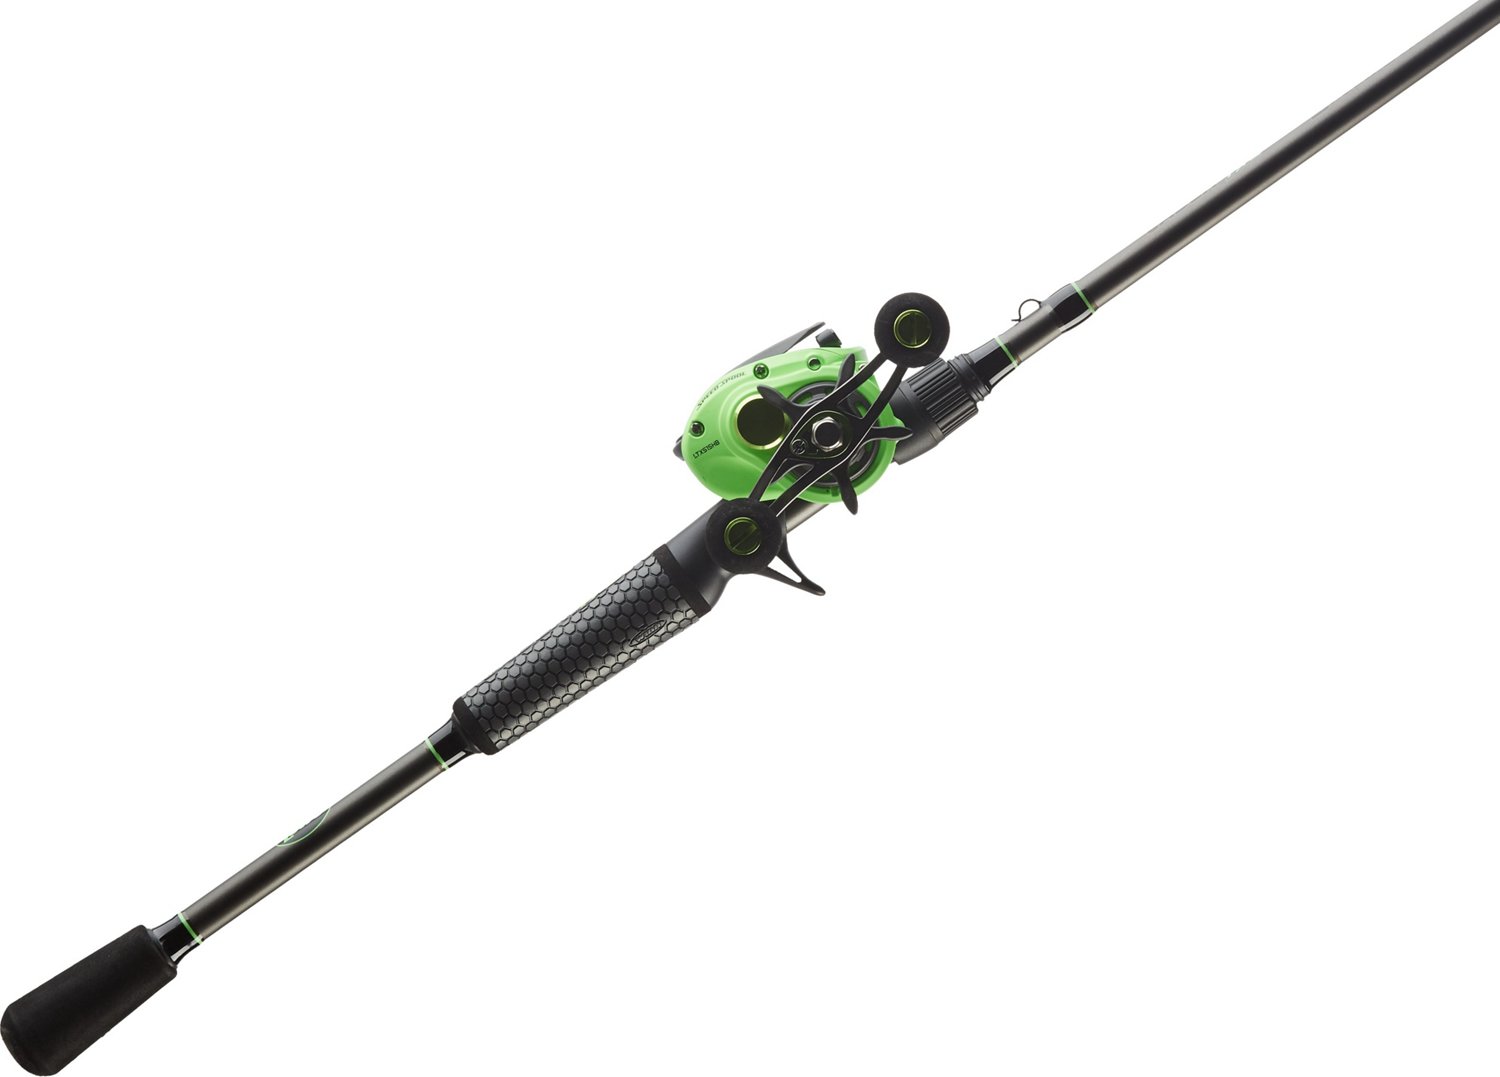 The Tackle Box - Lew's pistol grip rods are here! And